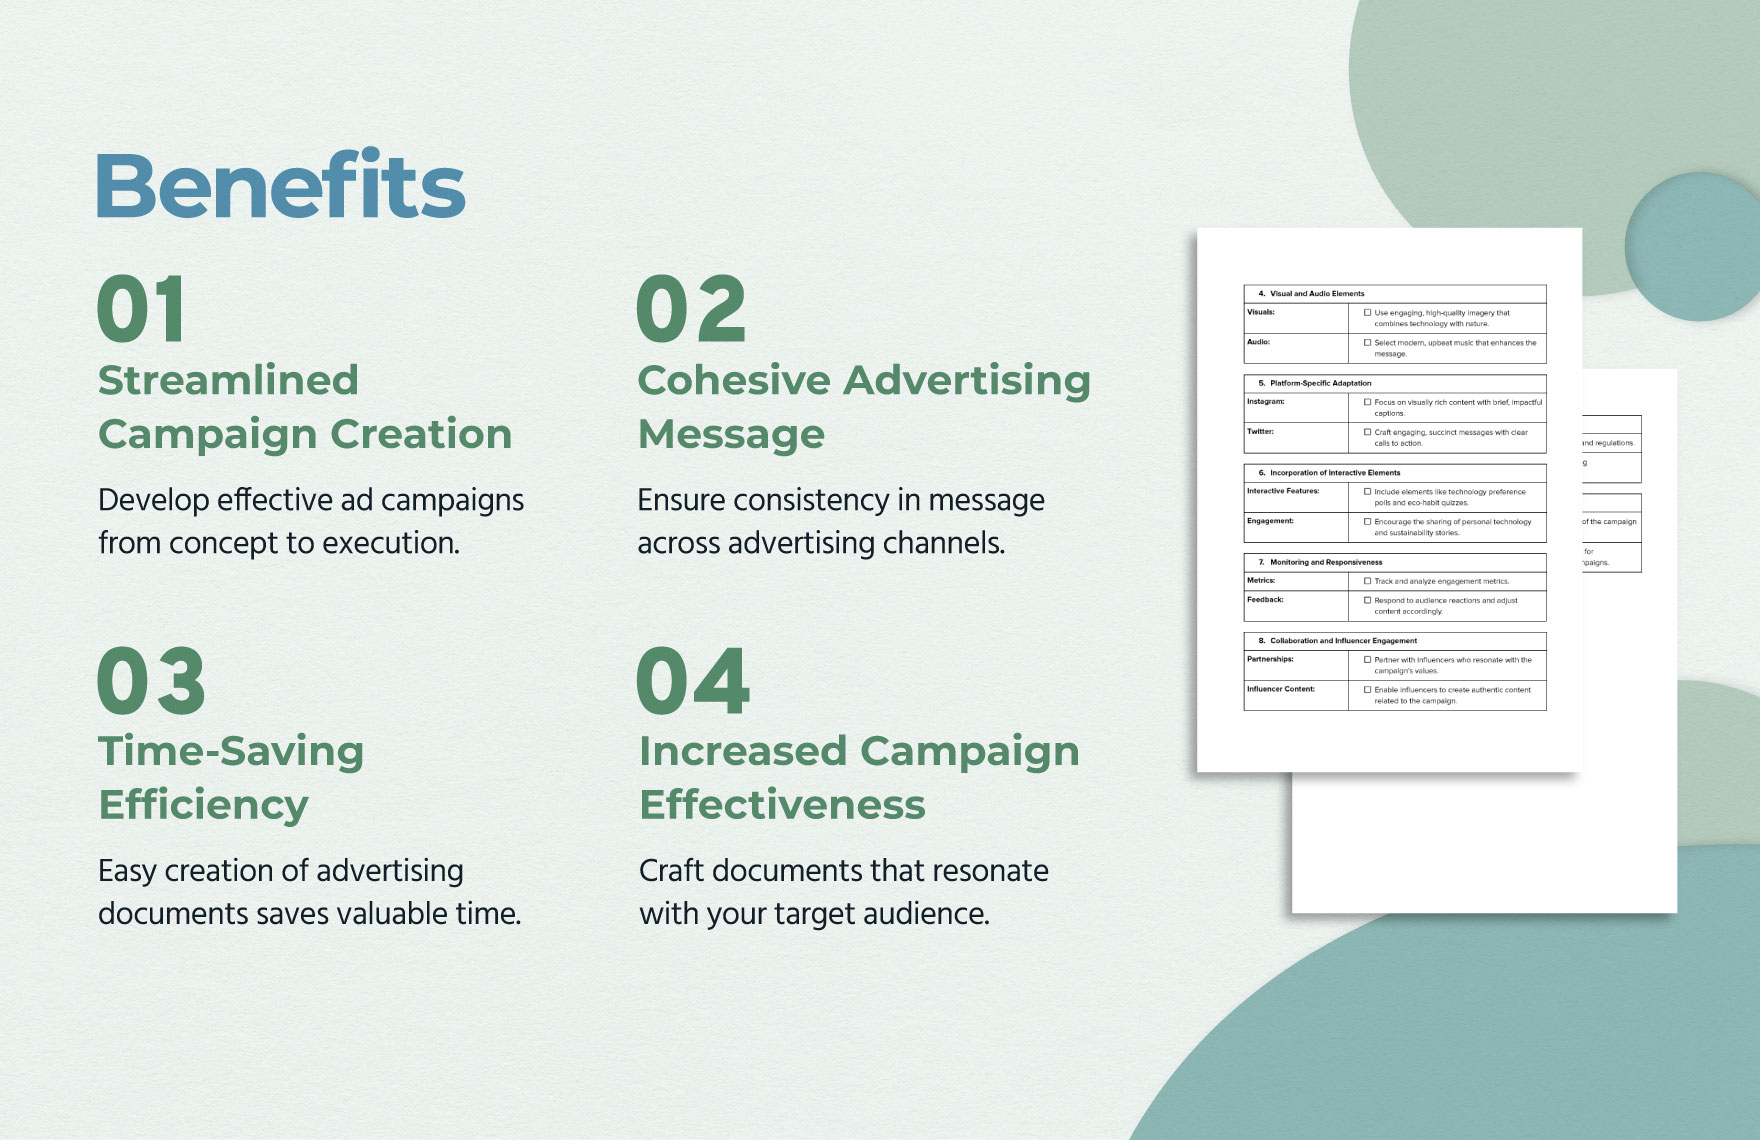 Viral Advertising Content Checklist Template